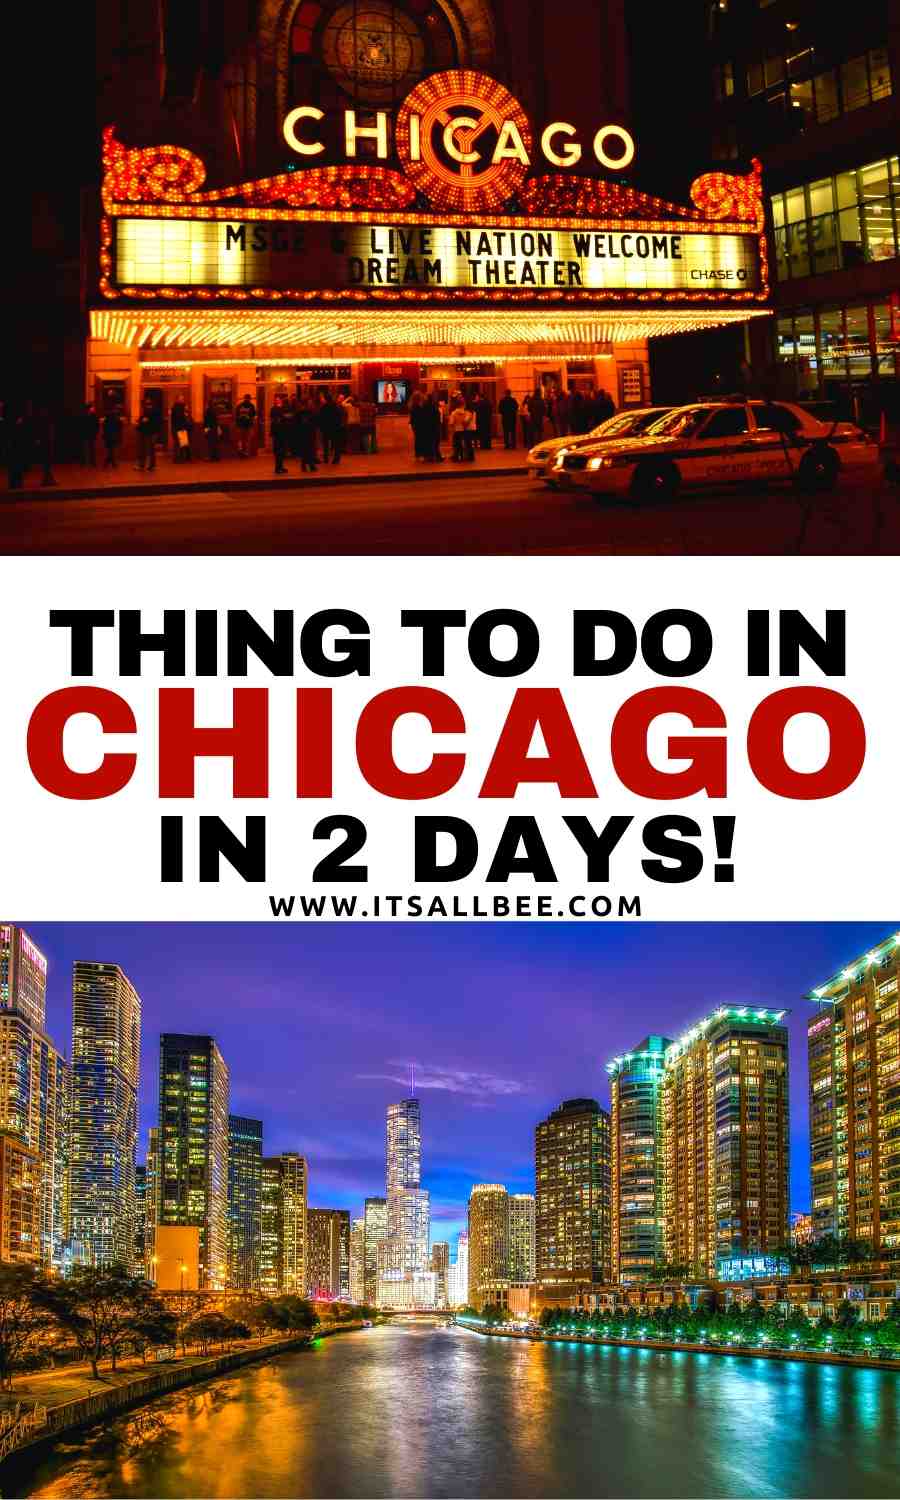 what to see and do in Chicago in 2 days - an itinerary guide